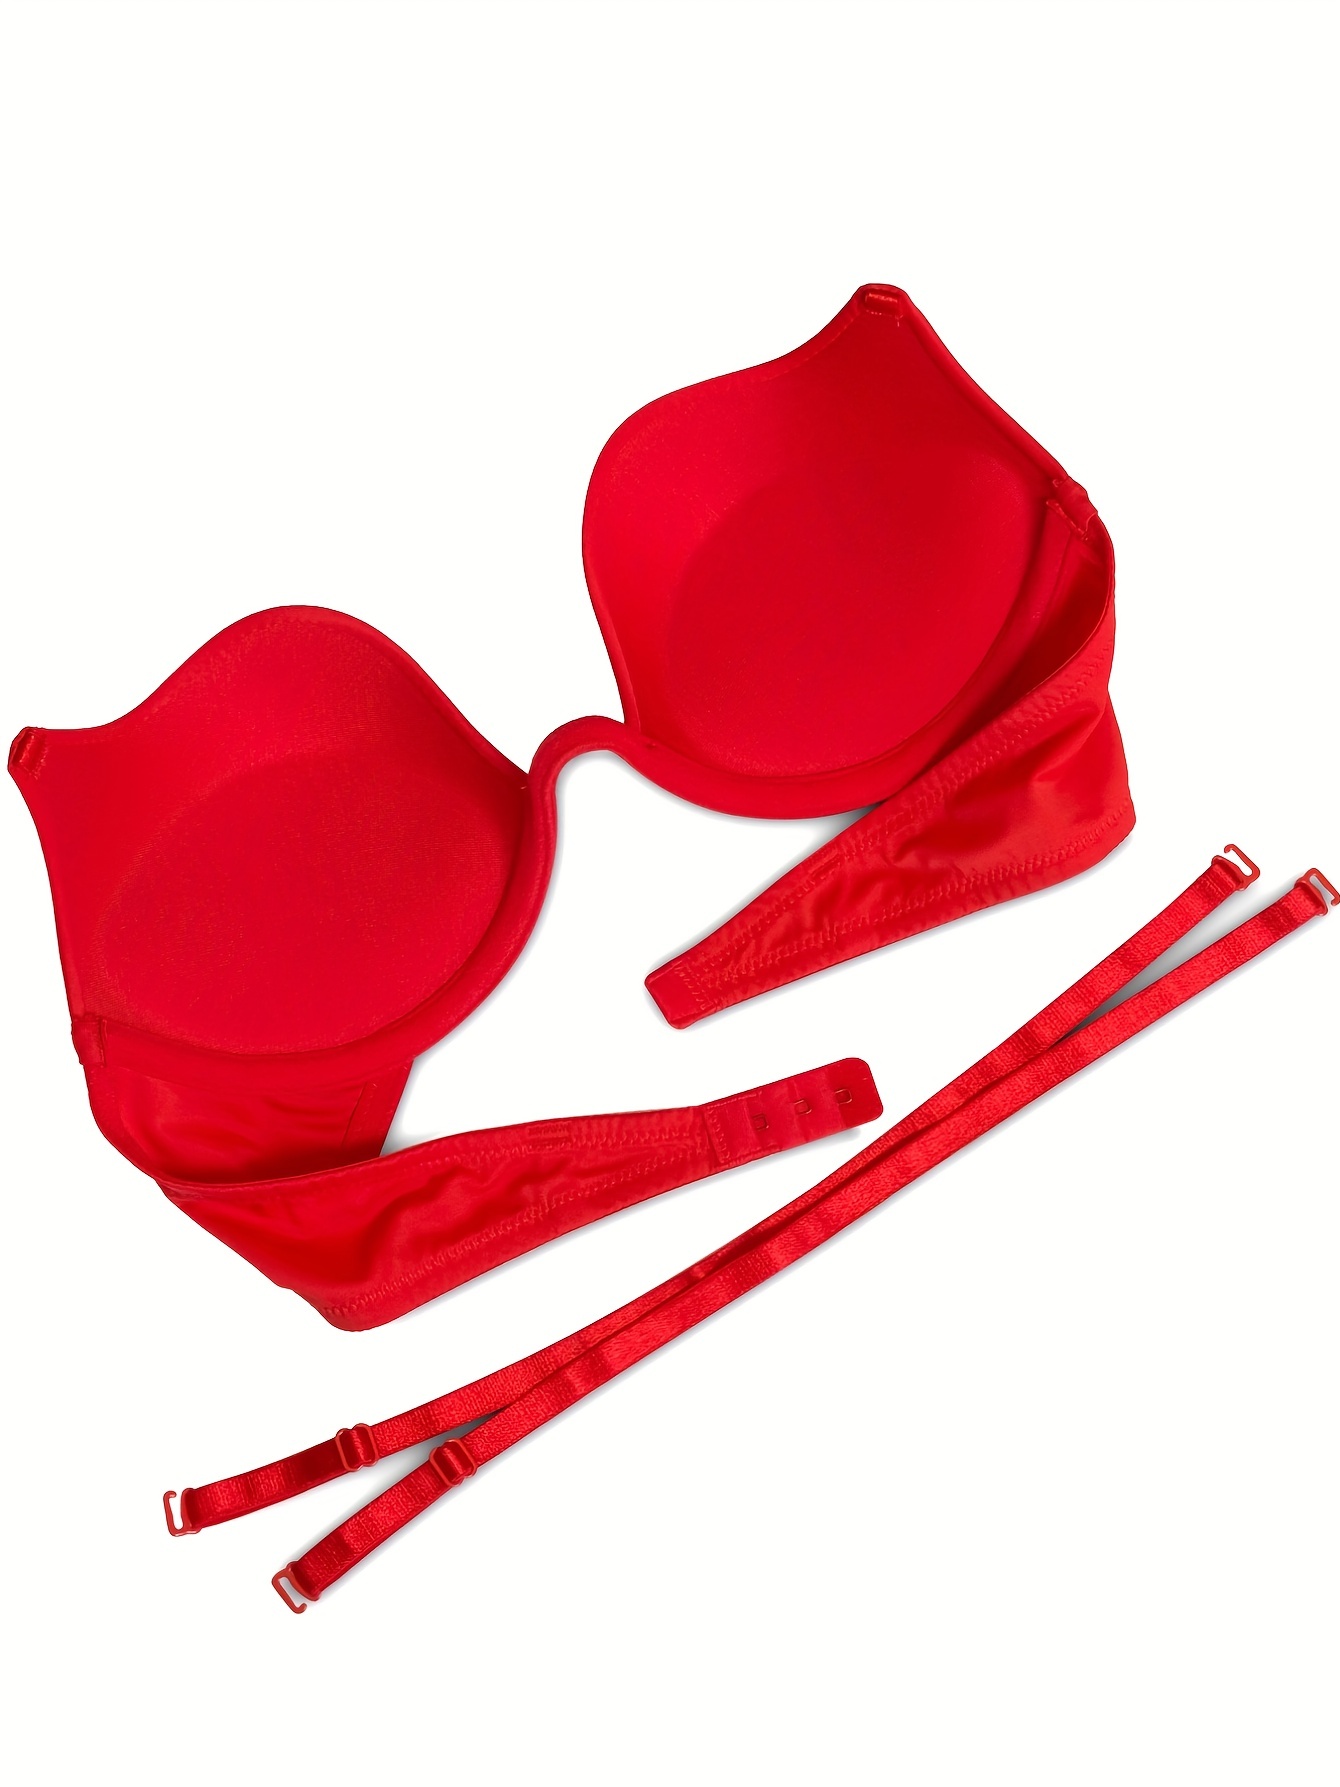 Vogue's Secret Women's Plunge Push Up Bra Multiway Deep V Convertible Low Back  Bras with Clear Straps Red price in UAE,  UAE